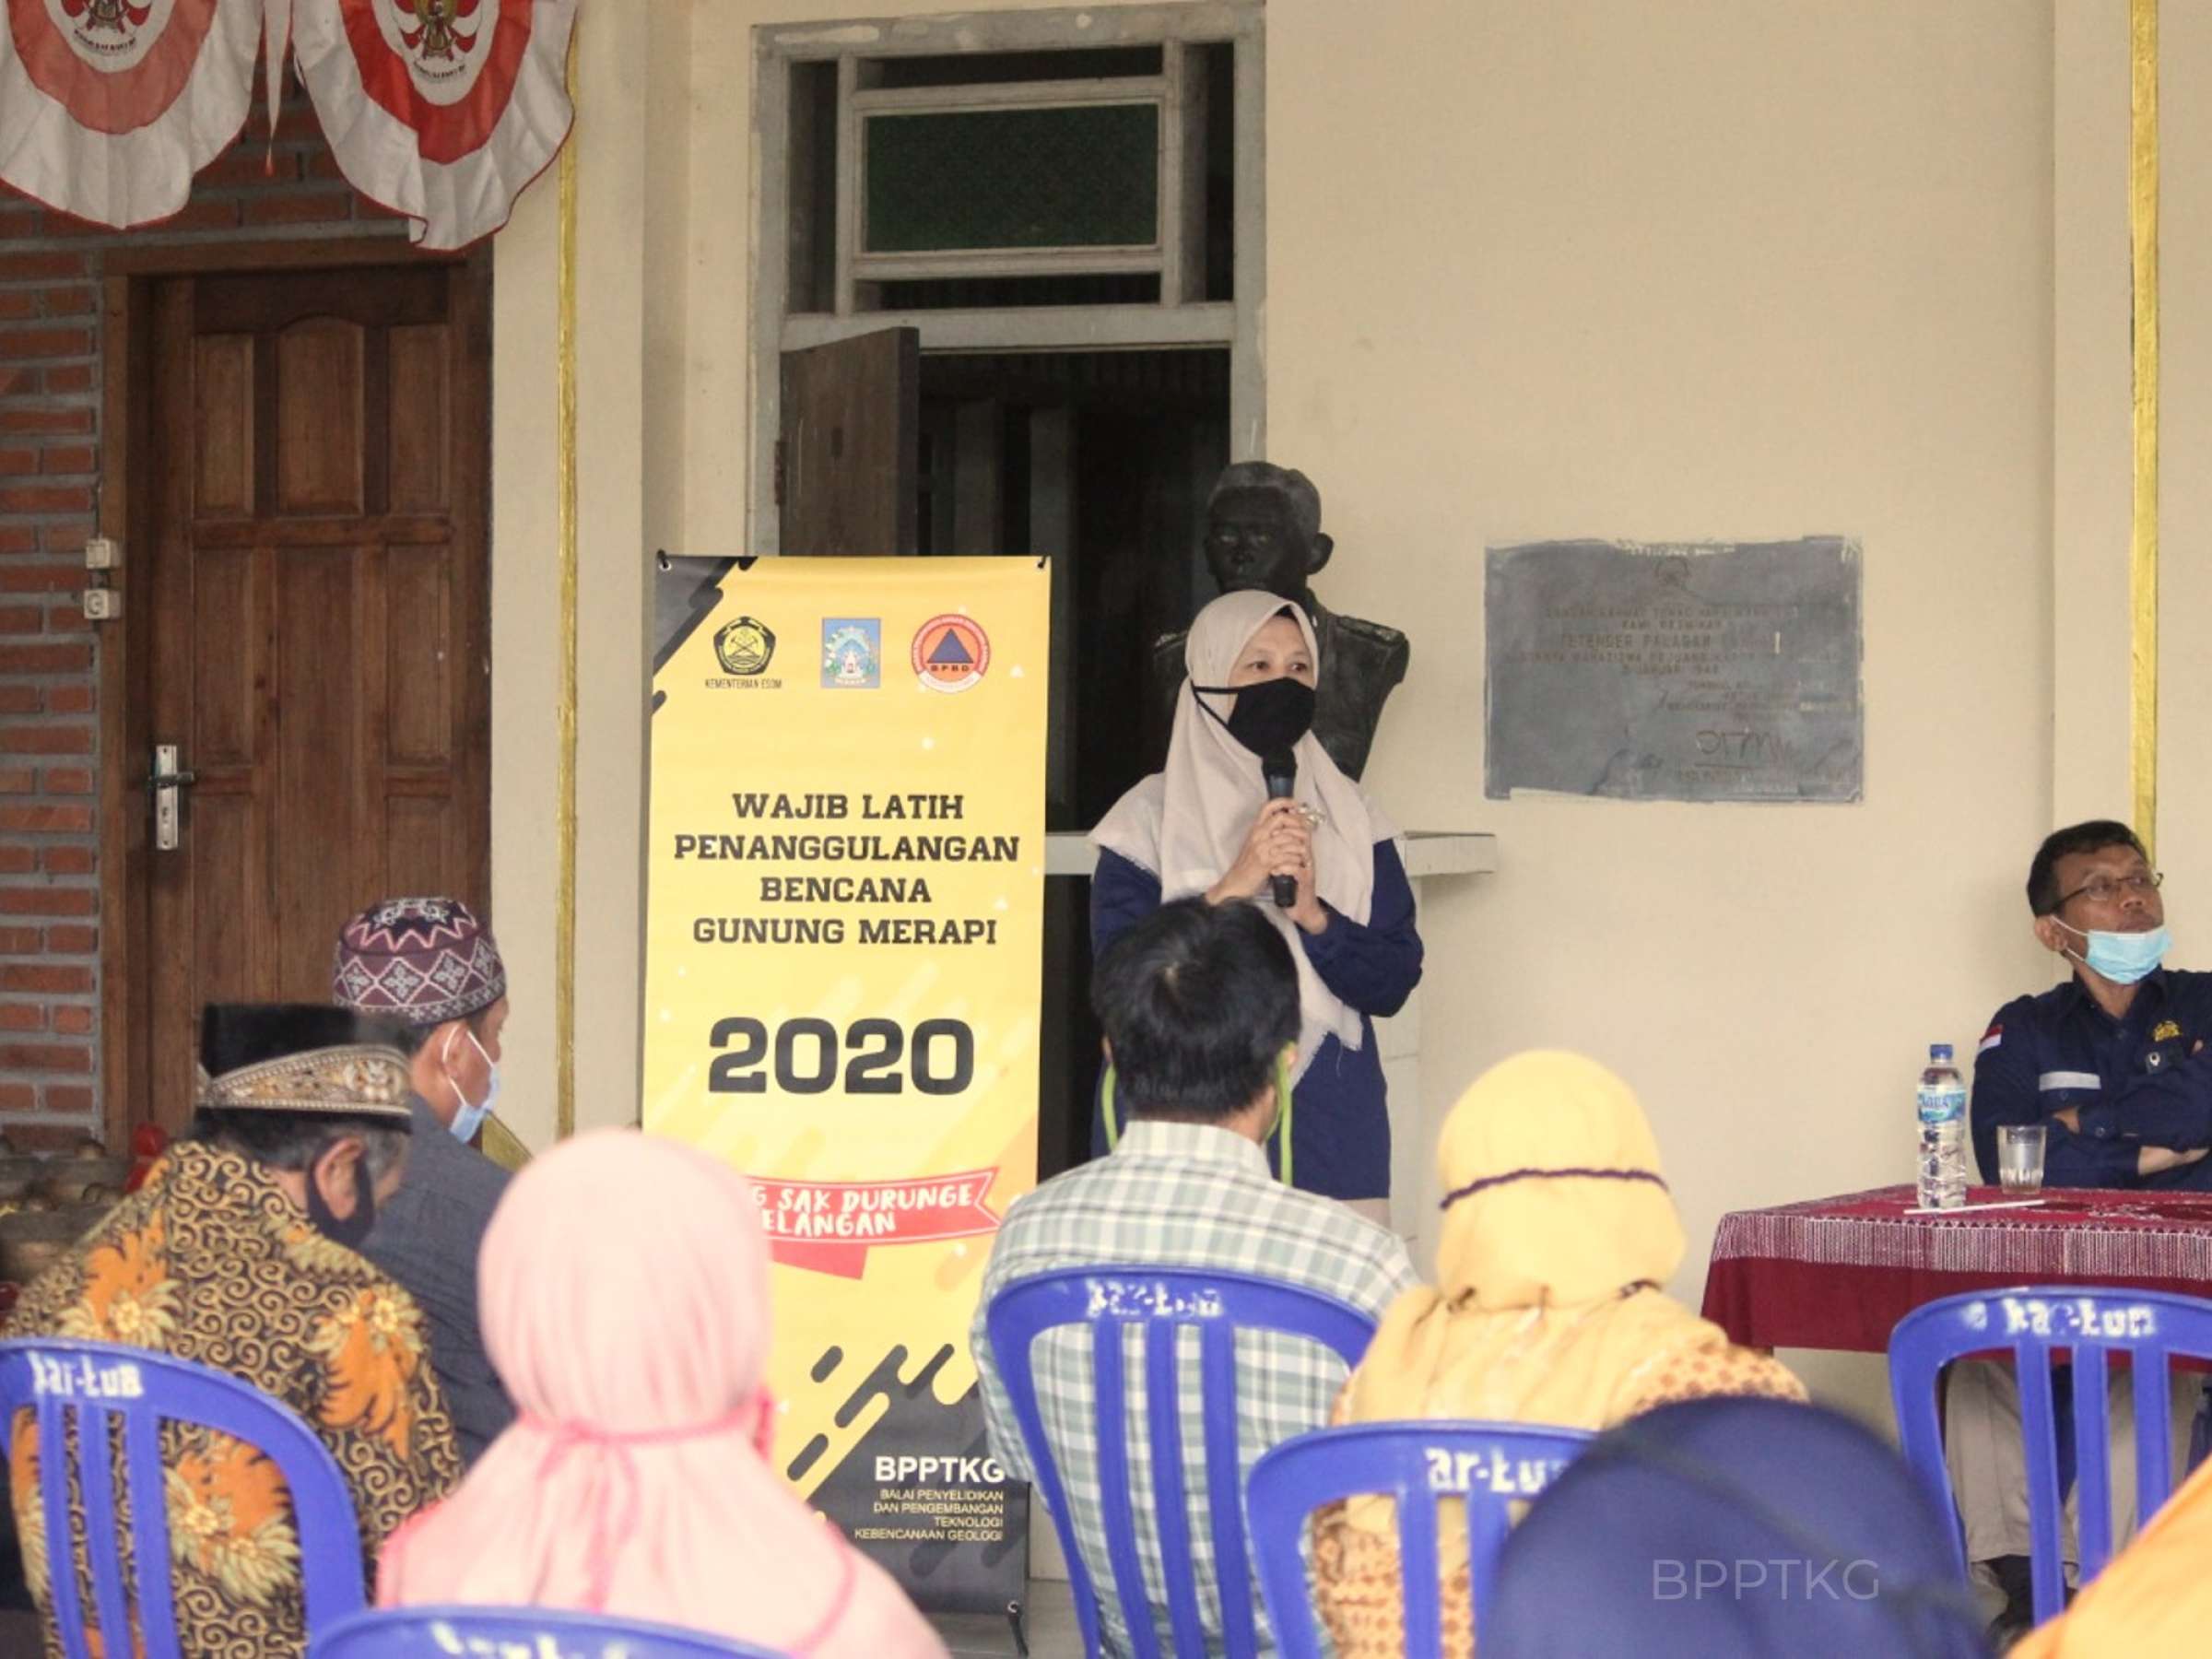 indonesian woman presents in front of a group